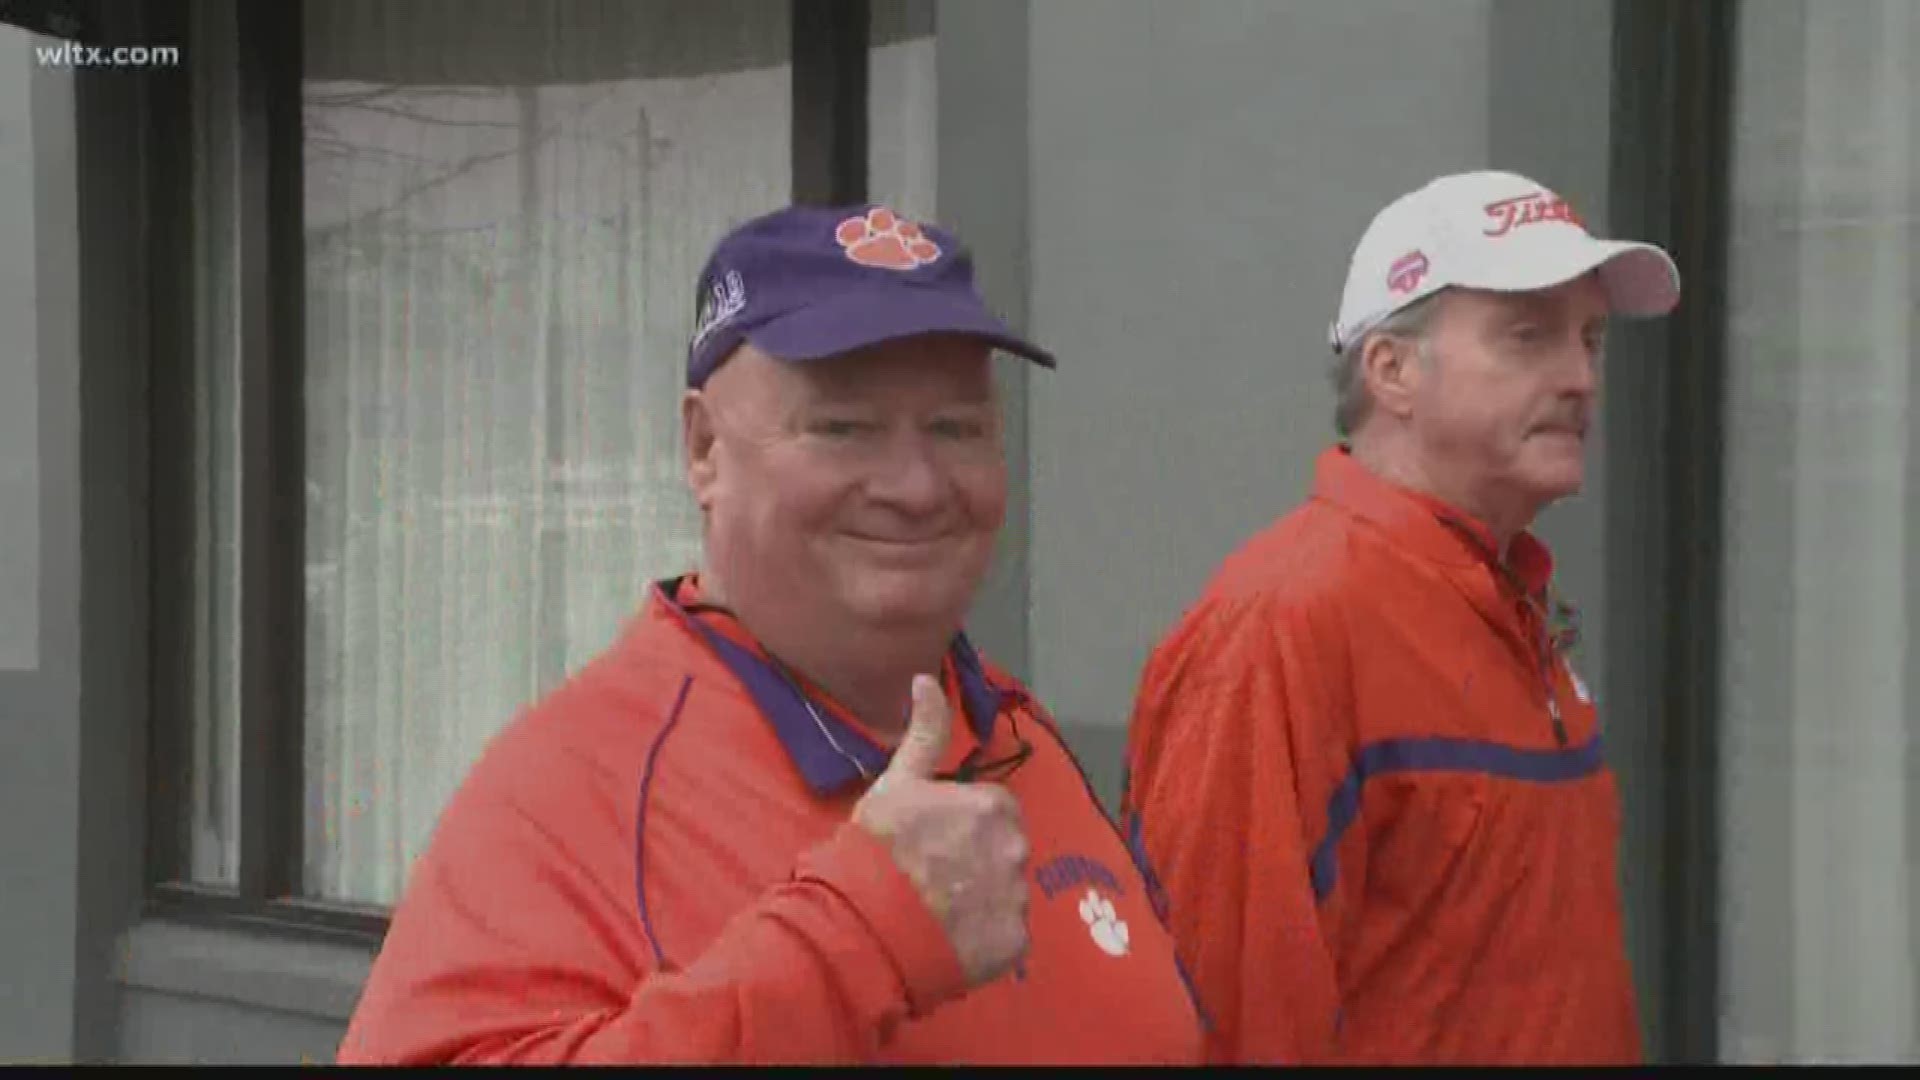 News19 caught up with Clemson fans who made the trip from the Midlands to the Big Easy for the national championship.